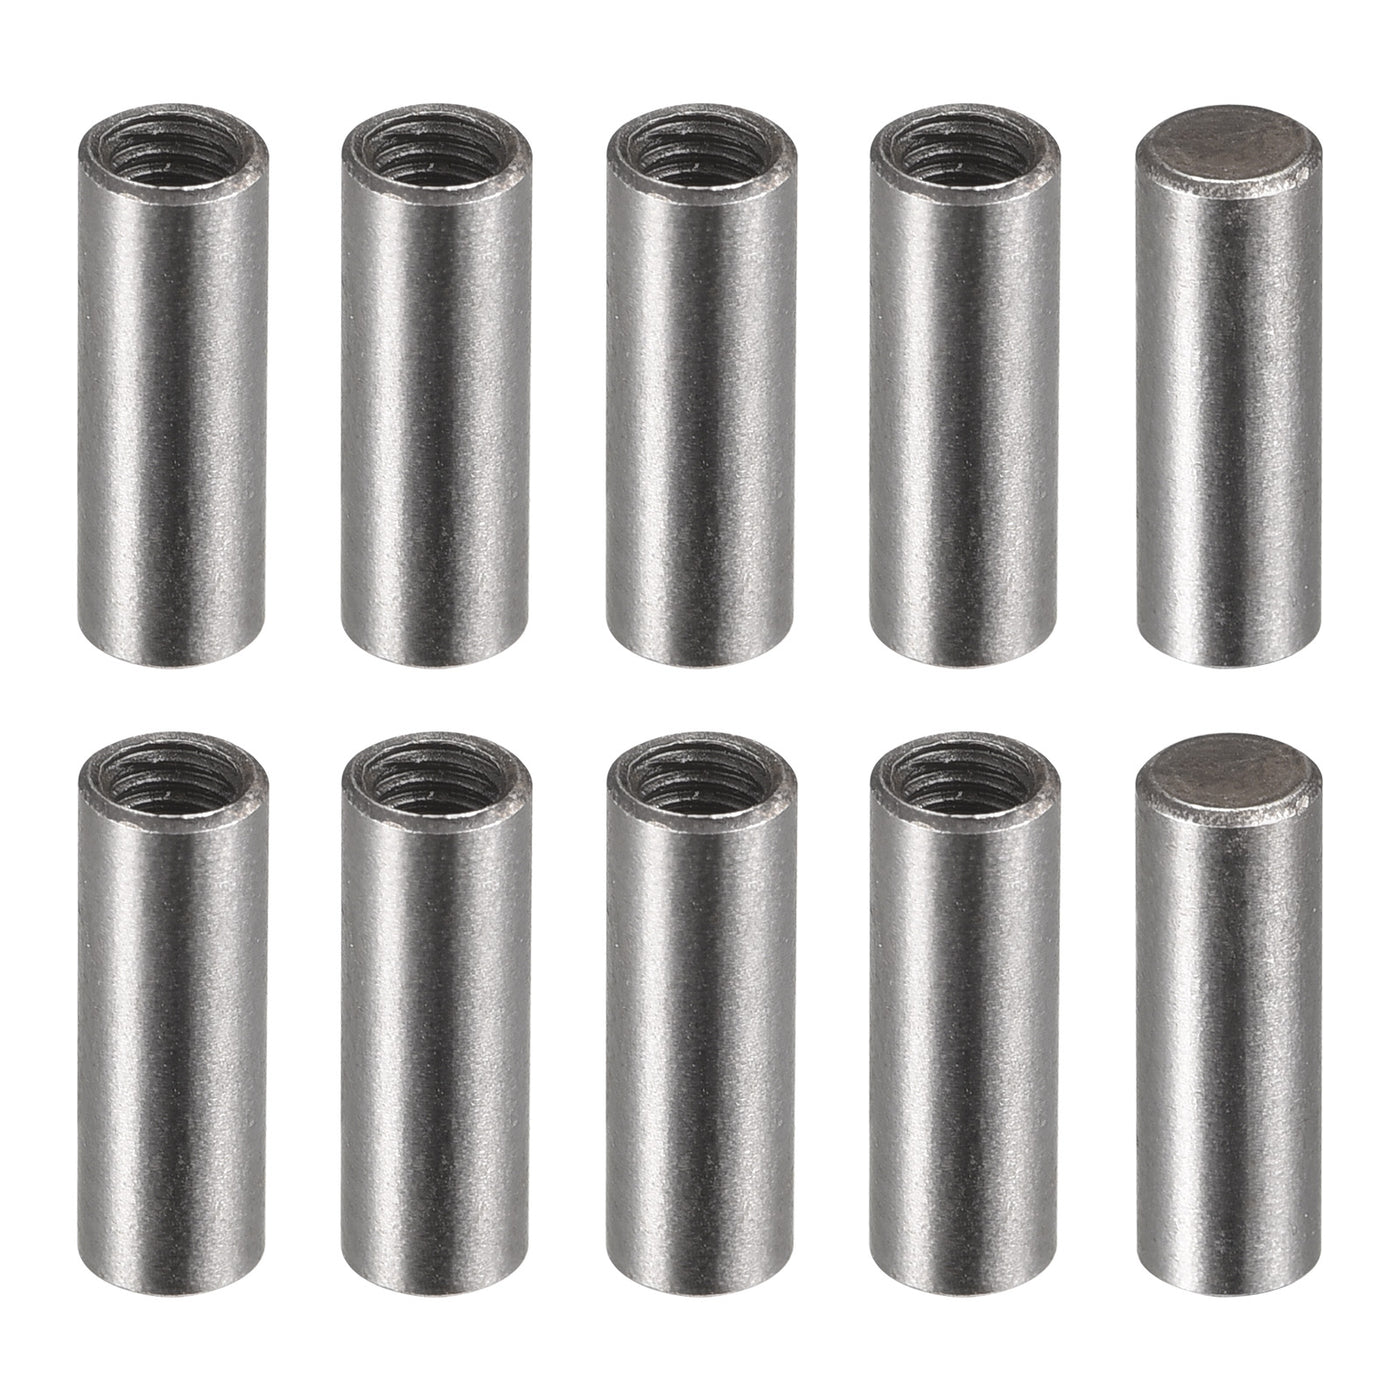 uxcell Uxcell Carbon Steel Dowel Pin 4 x 12mm M3 Female Thread Cylindrical Shelf Support Pin 20Pcs